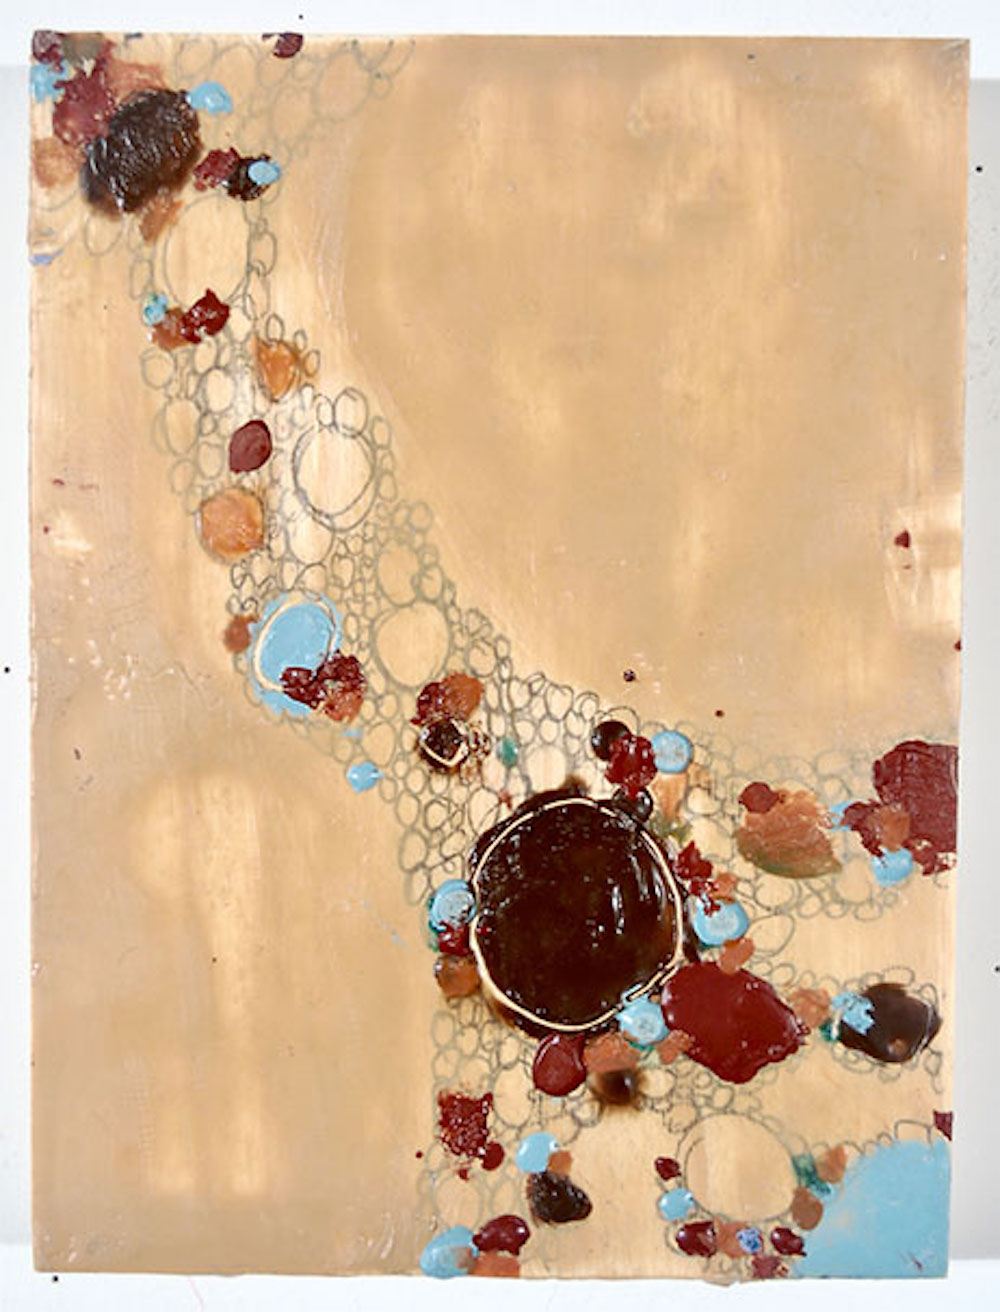 Painting using browns, blues, and reds. the painting almost appears to read as bubbles. 